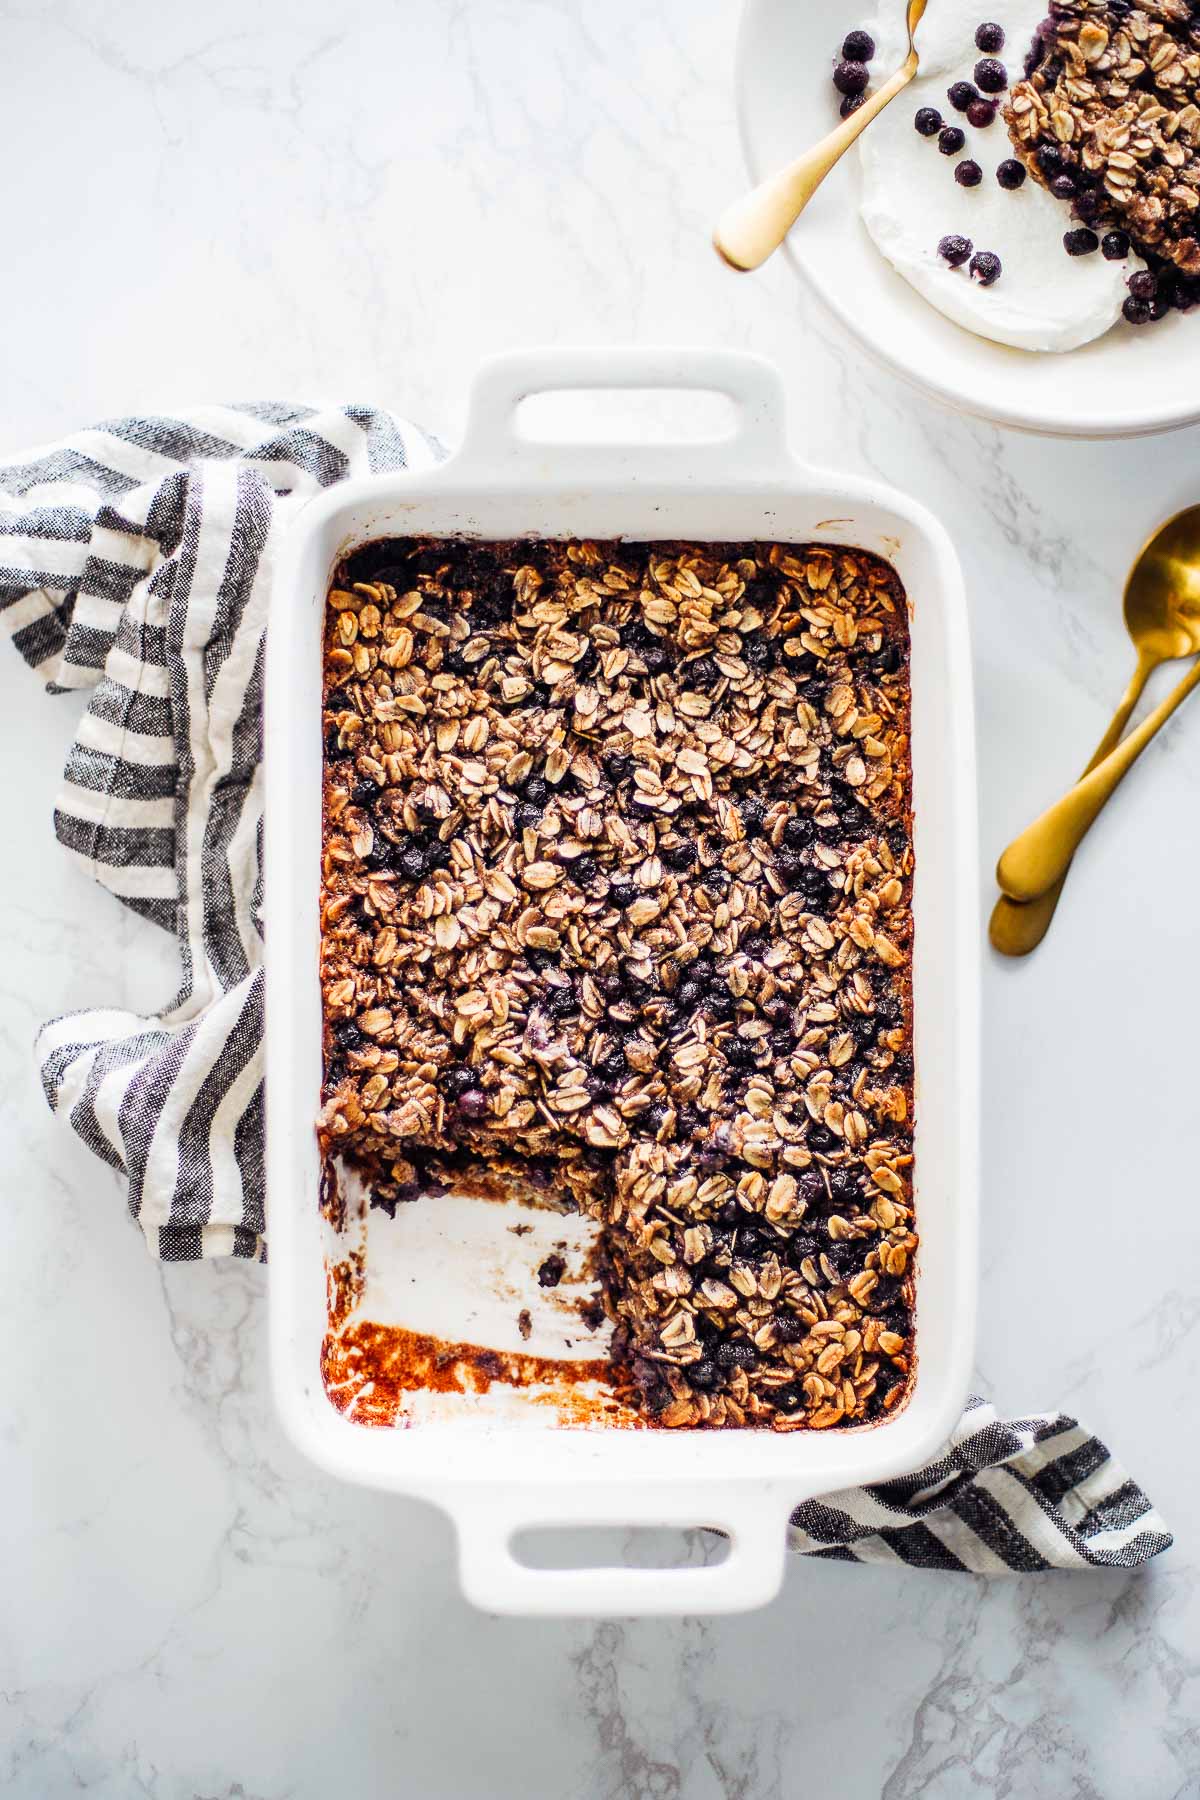 Baked blueberry oatmeal in a casserole dish.